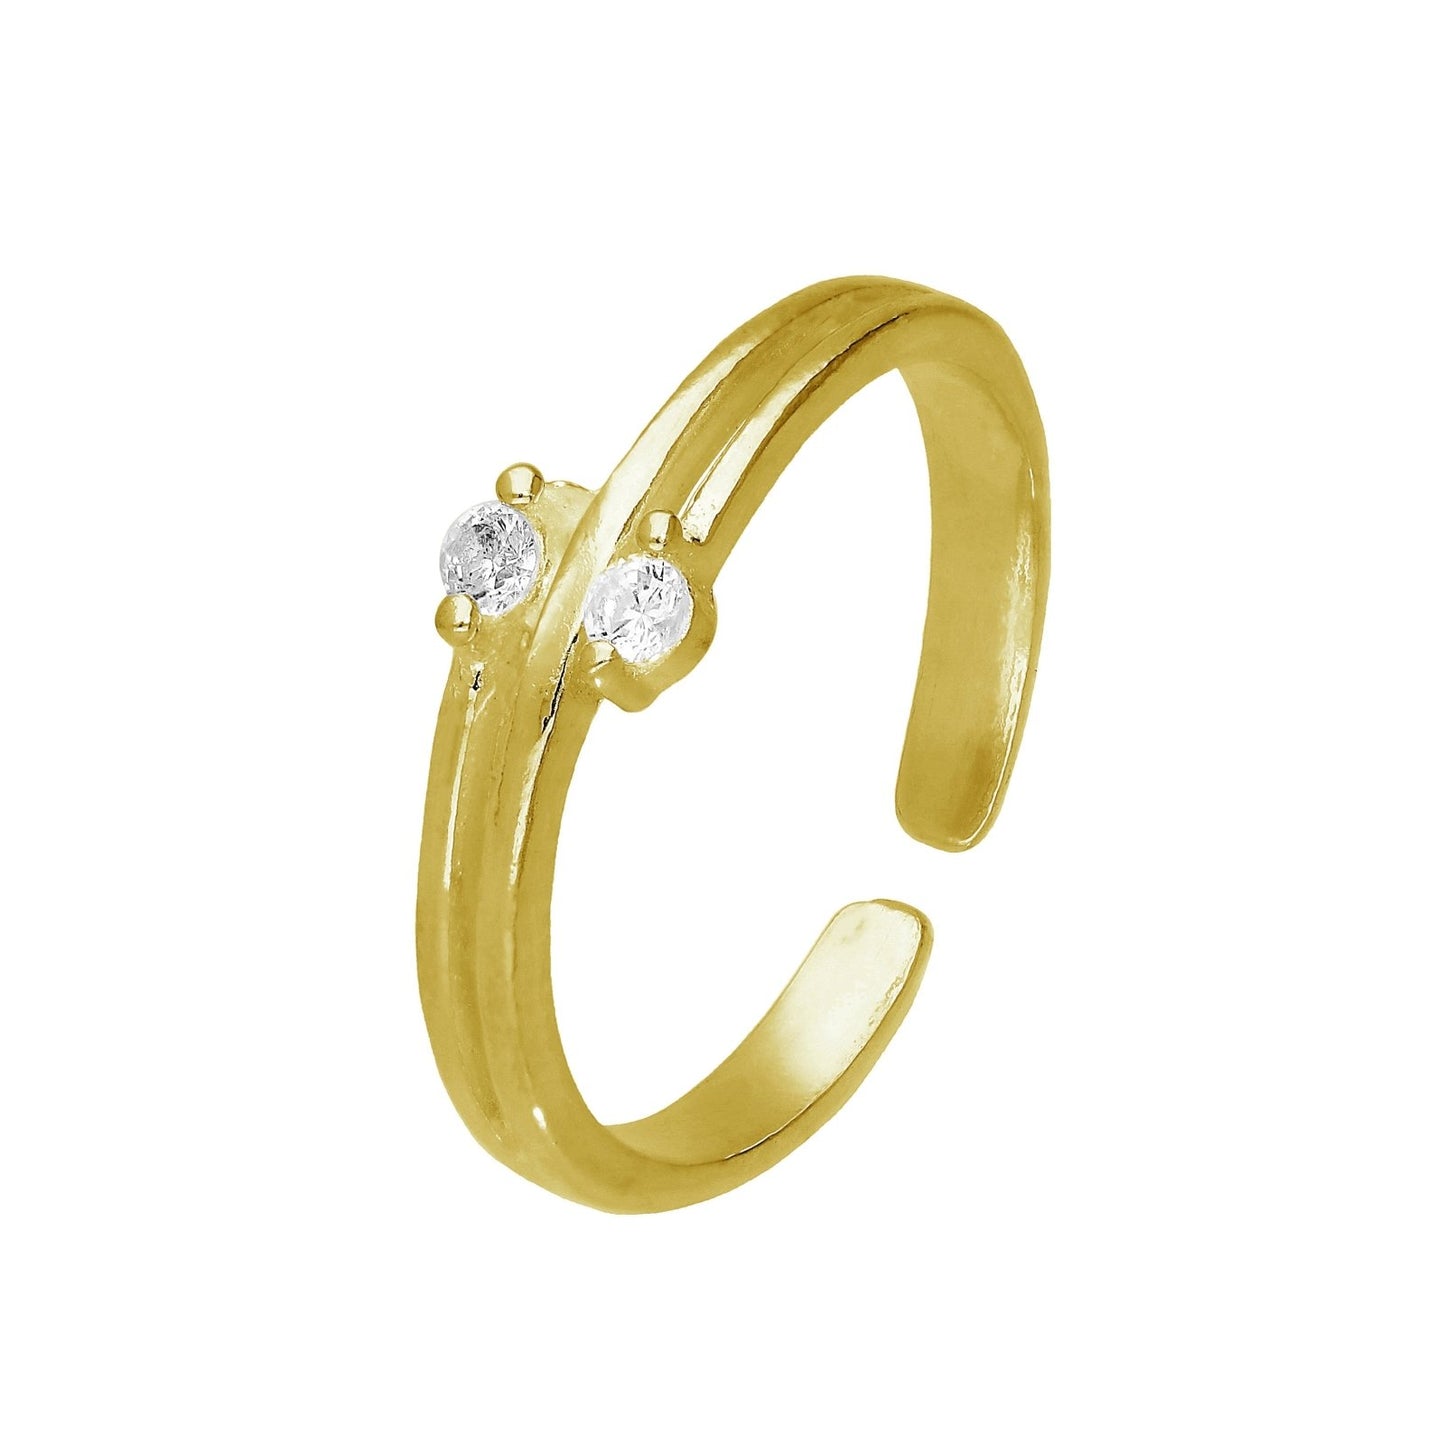 Gold Plated Sterling Silver & Double CZ Adjustable Toe Ring - jewellerybox